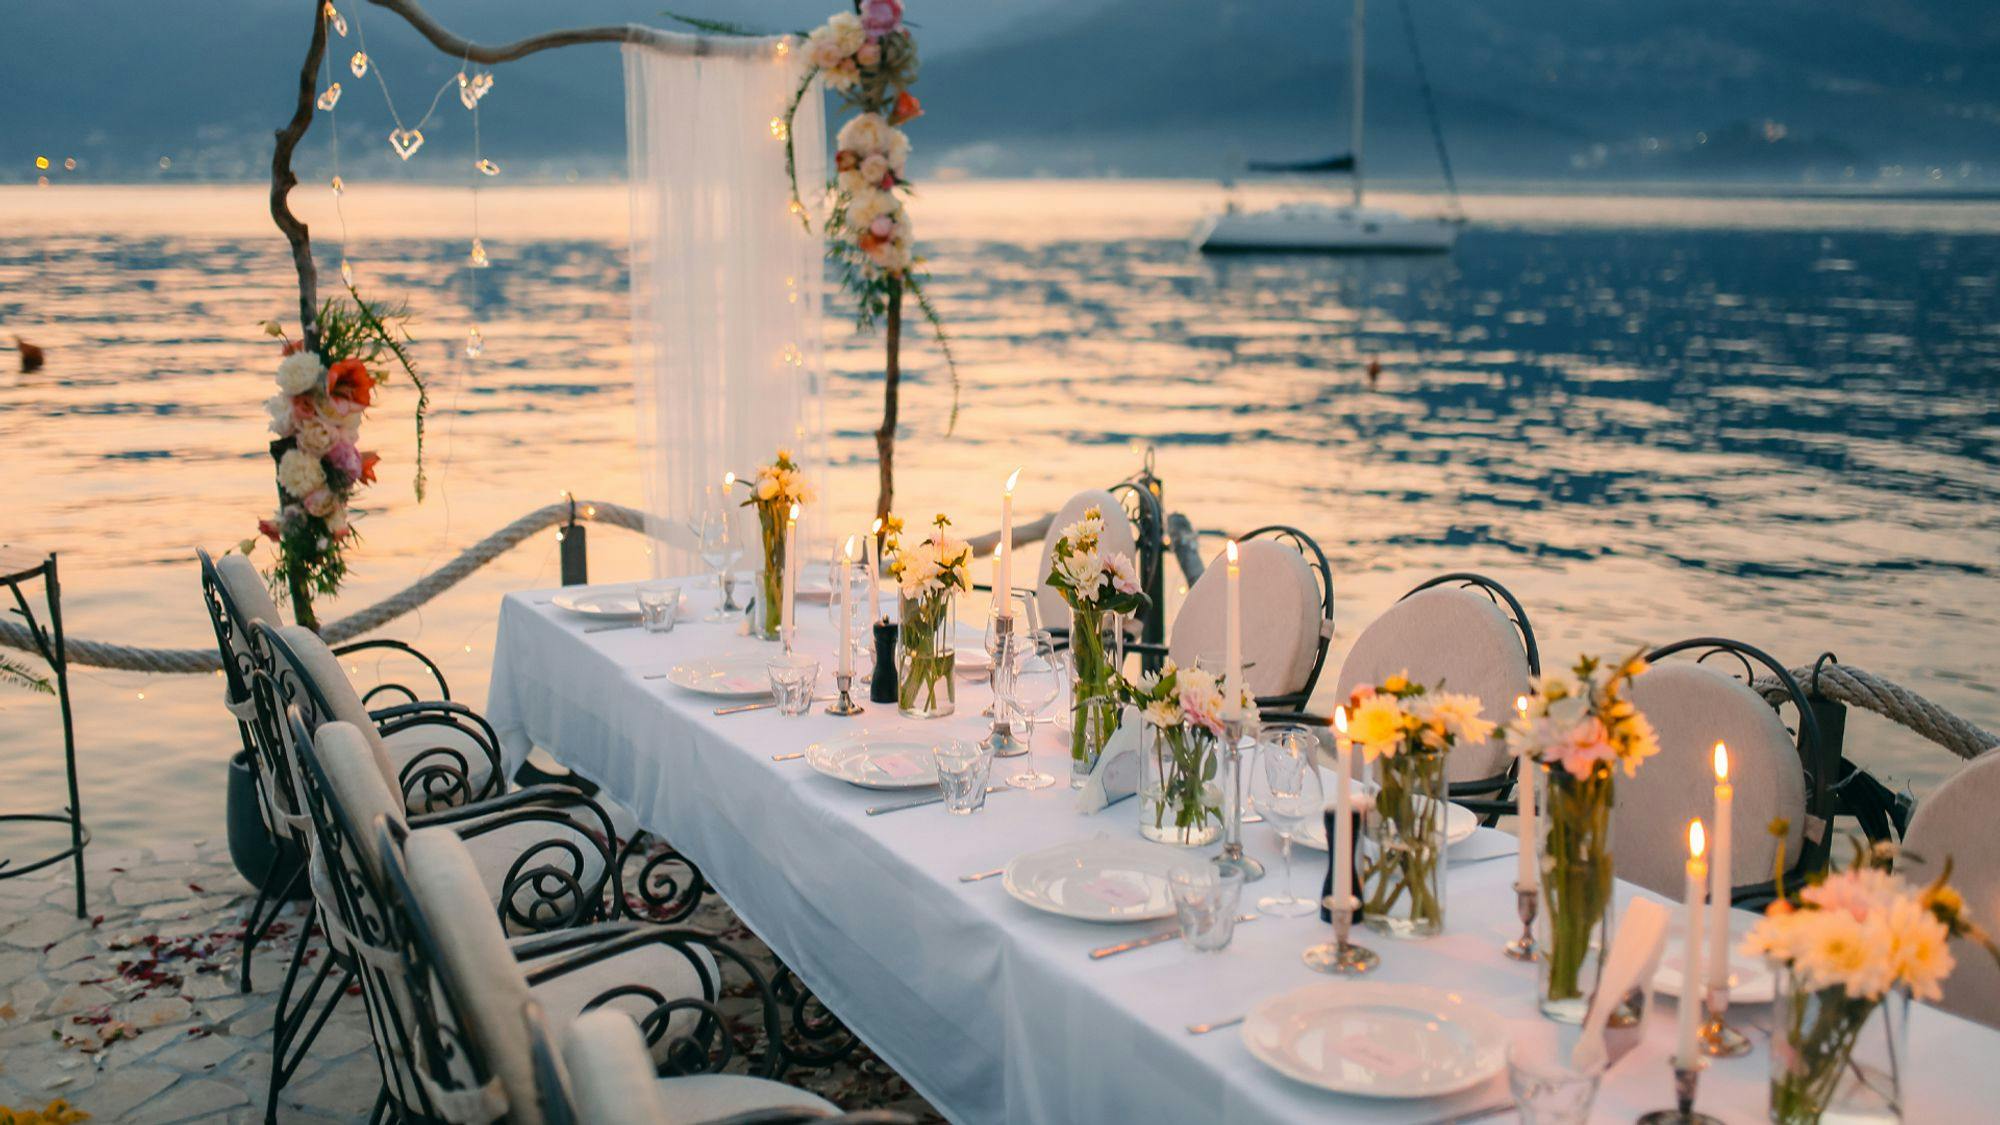 Wedding experience by the lake